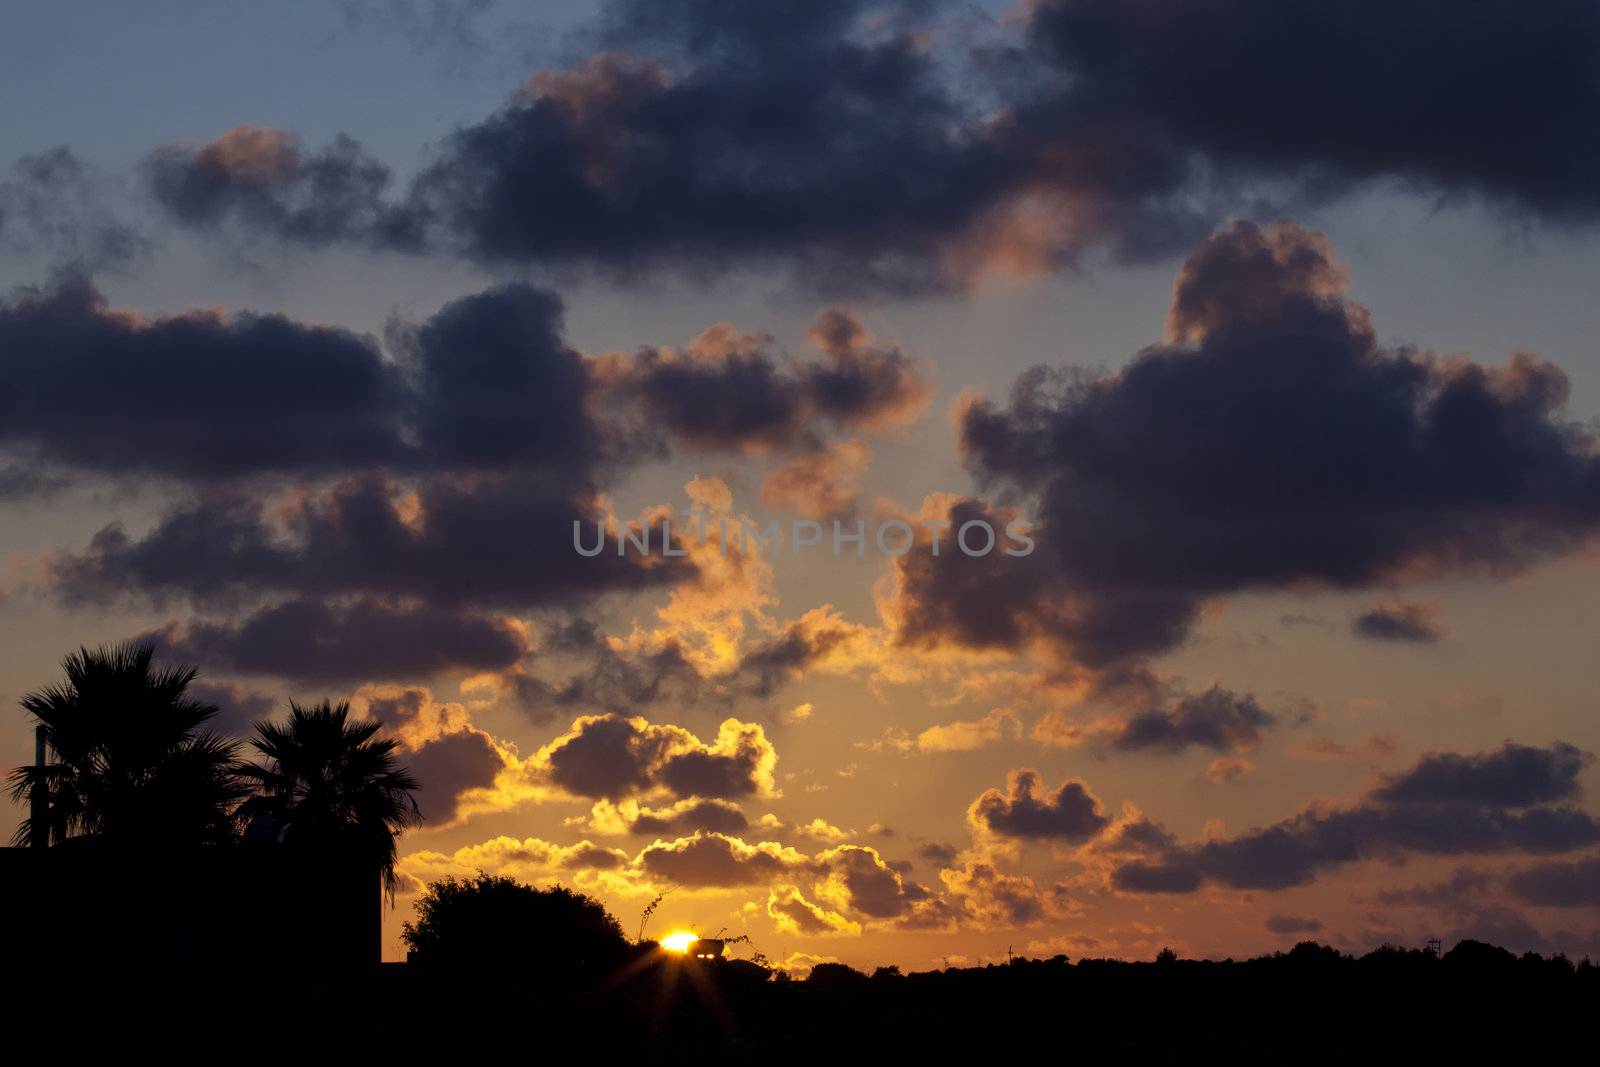 A lightly clouded sky during sunset shot from atop Wardija Hill in Malta; straight out of the camera and unedited